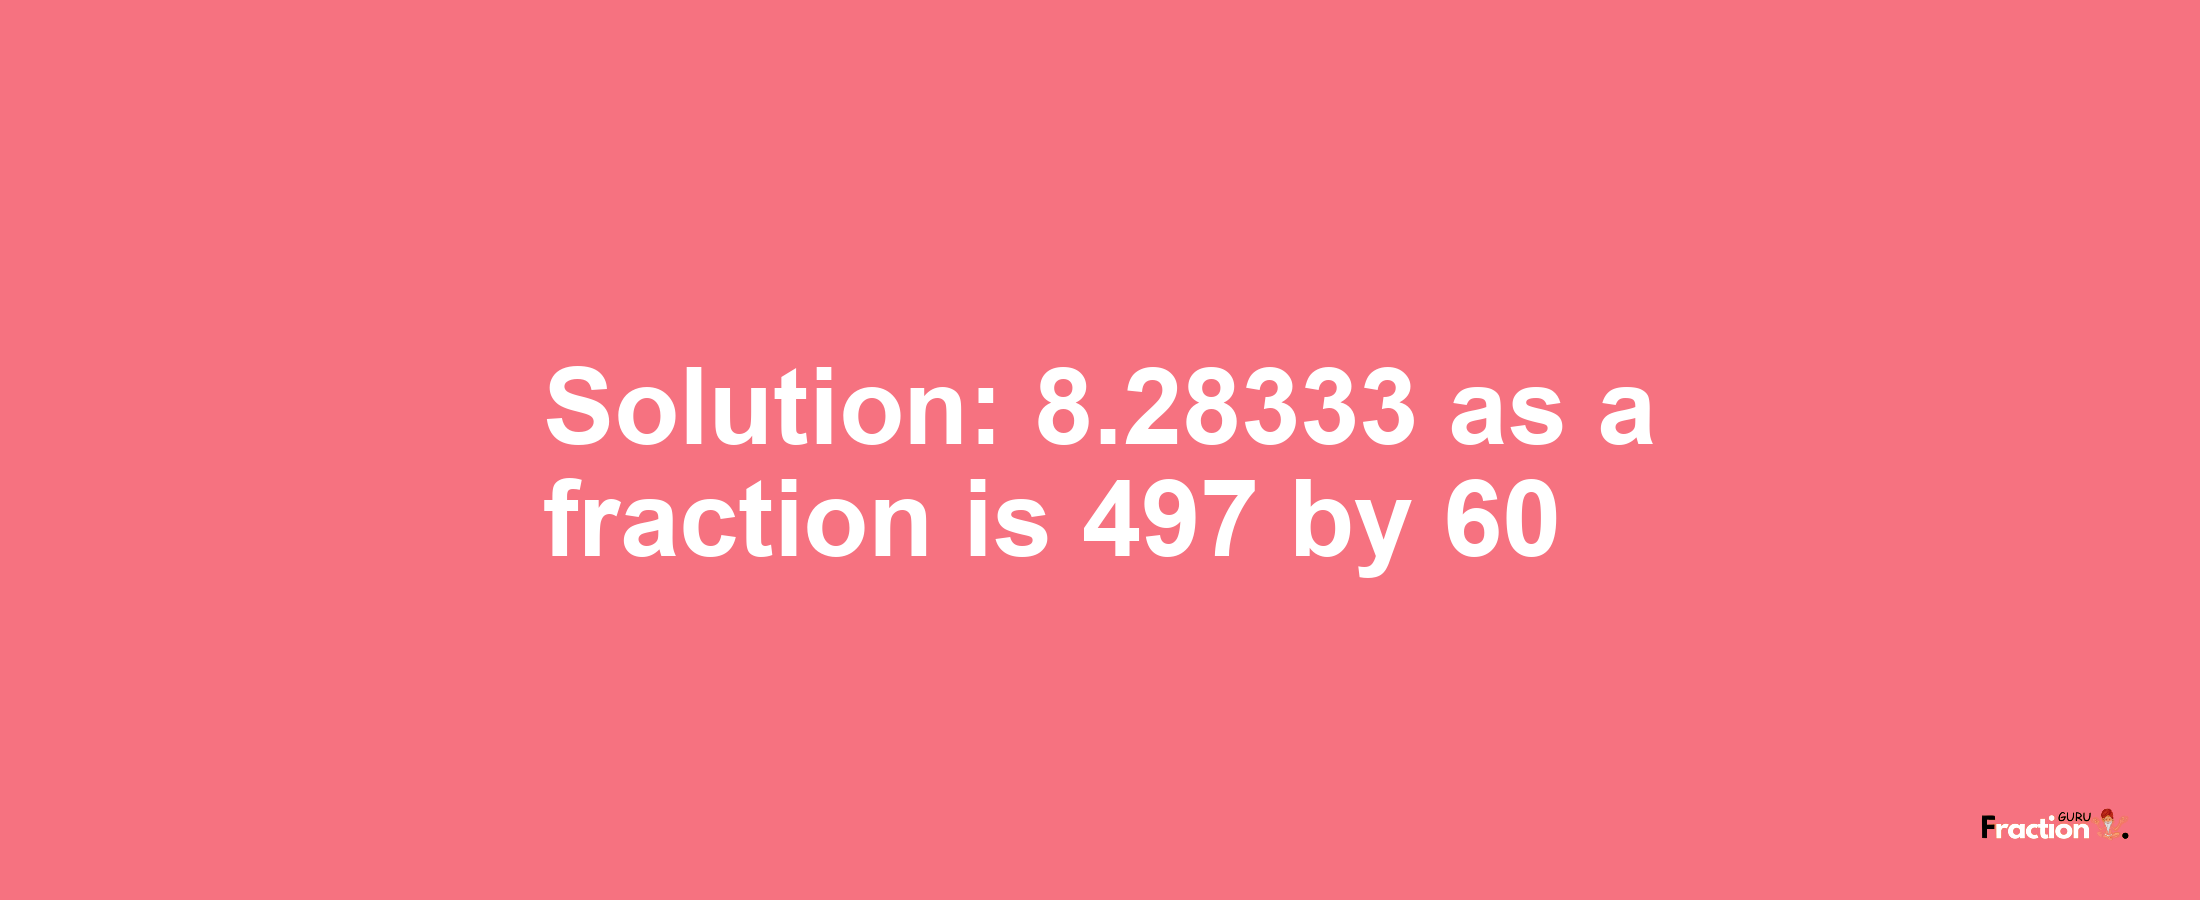 Solution:8.28333 as a fraction is 497/60